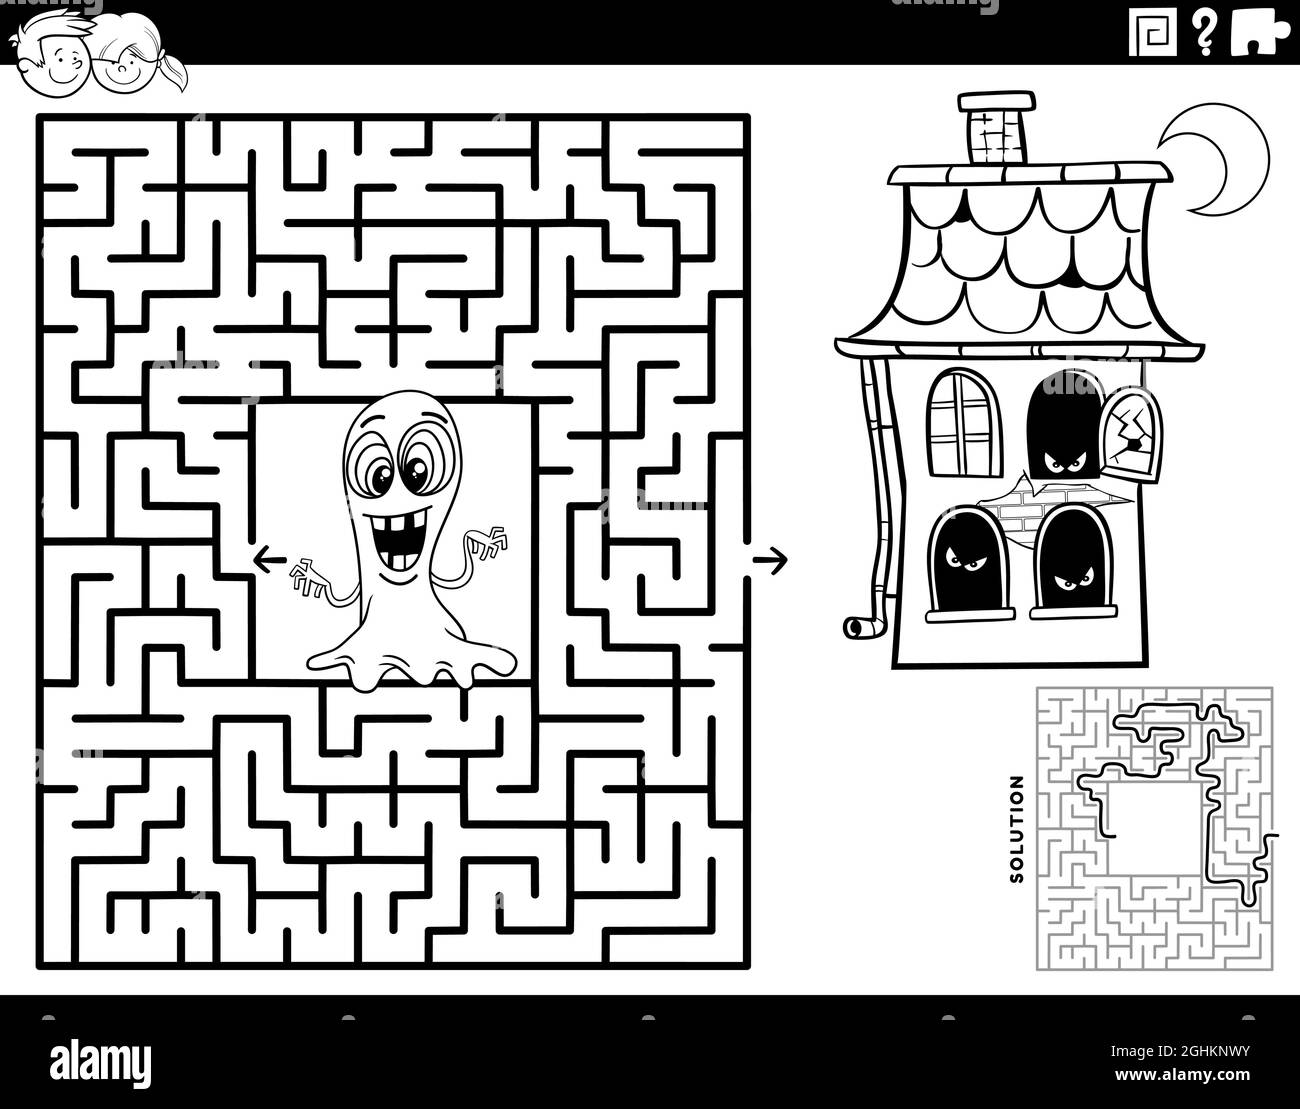 Black and white cartoon illustration of educational maze puzzle game with ghost and haunted house characters coloring book page stock vector image art